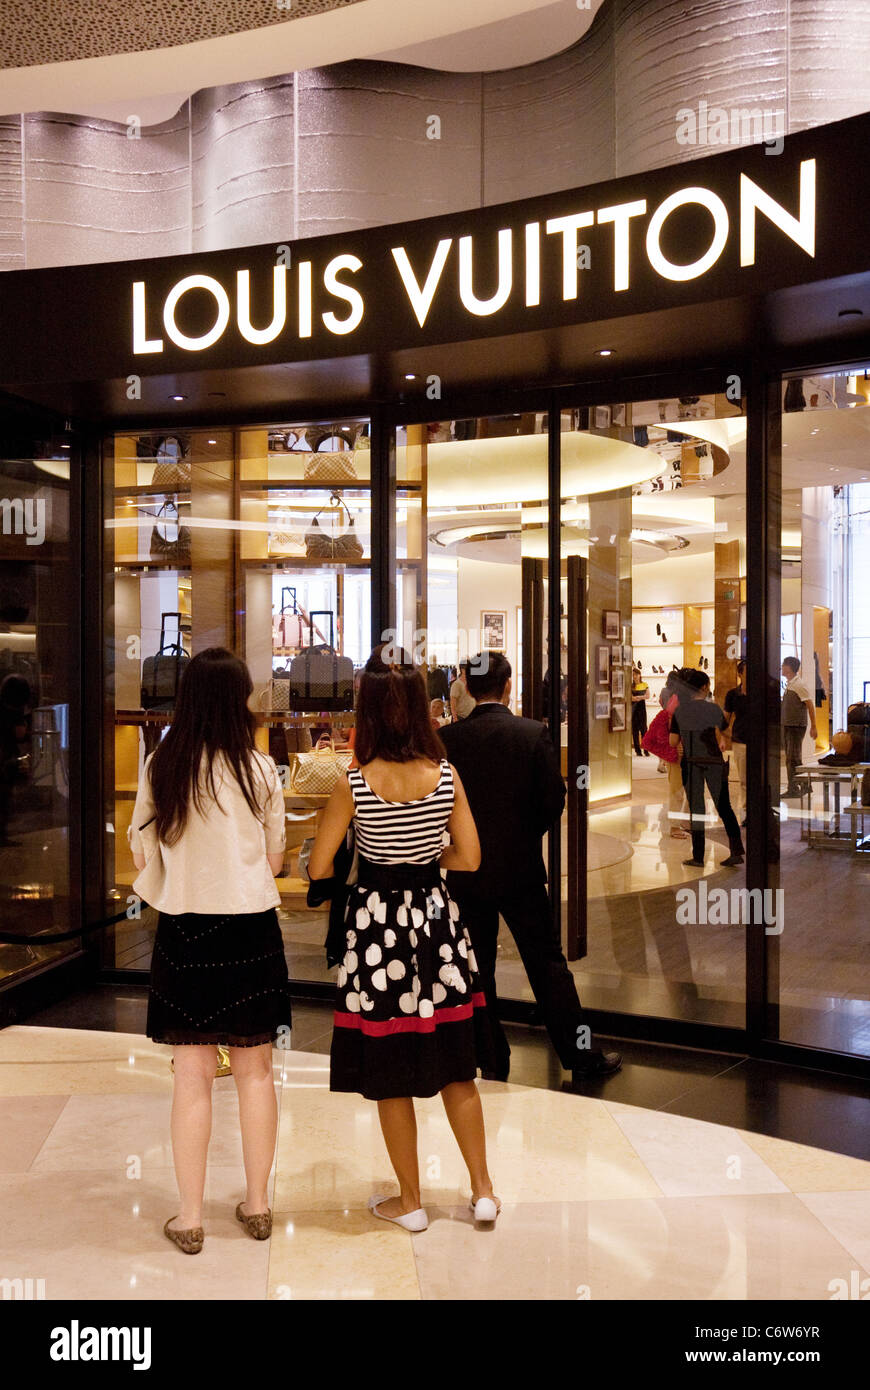 SINGAPORE-JAN 08, 2018: Louis Vuitton LV Outlet In Changi Airport, Singapore.  The Louis Vuitton Company Operates With More Than 460 Stores Worldwide.  Stock Photo, Picture and Royalty Free Image. Image 94332289.